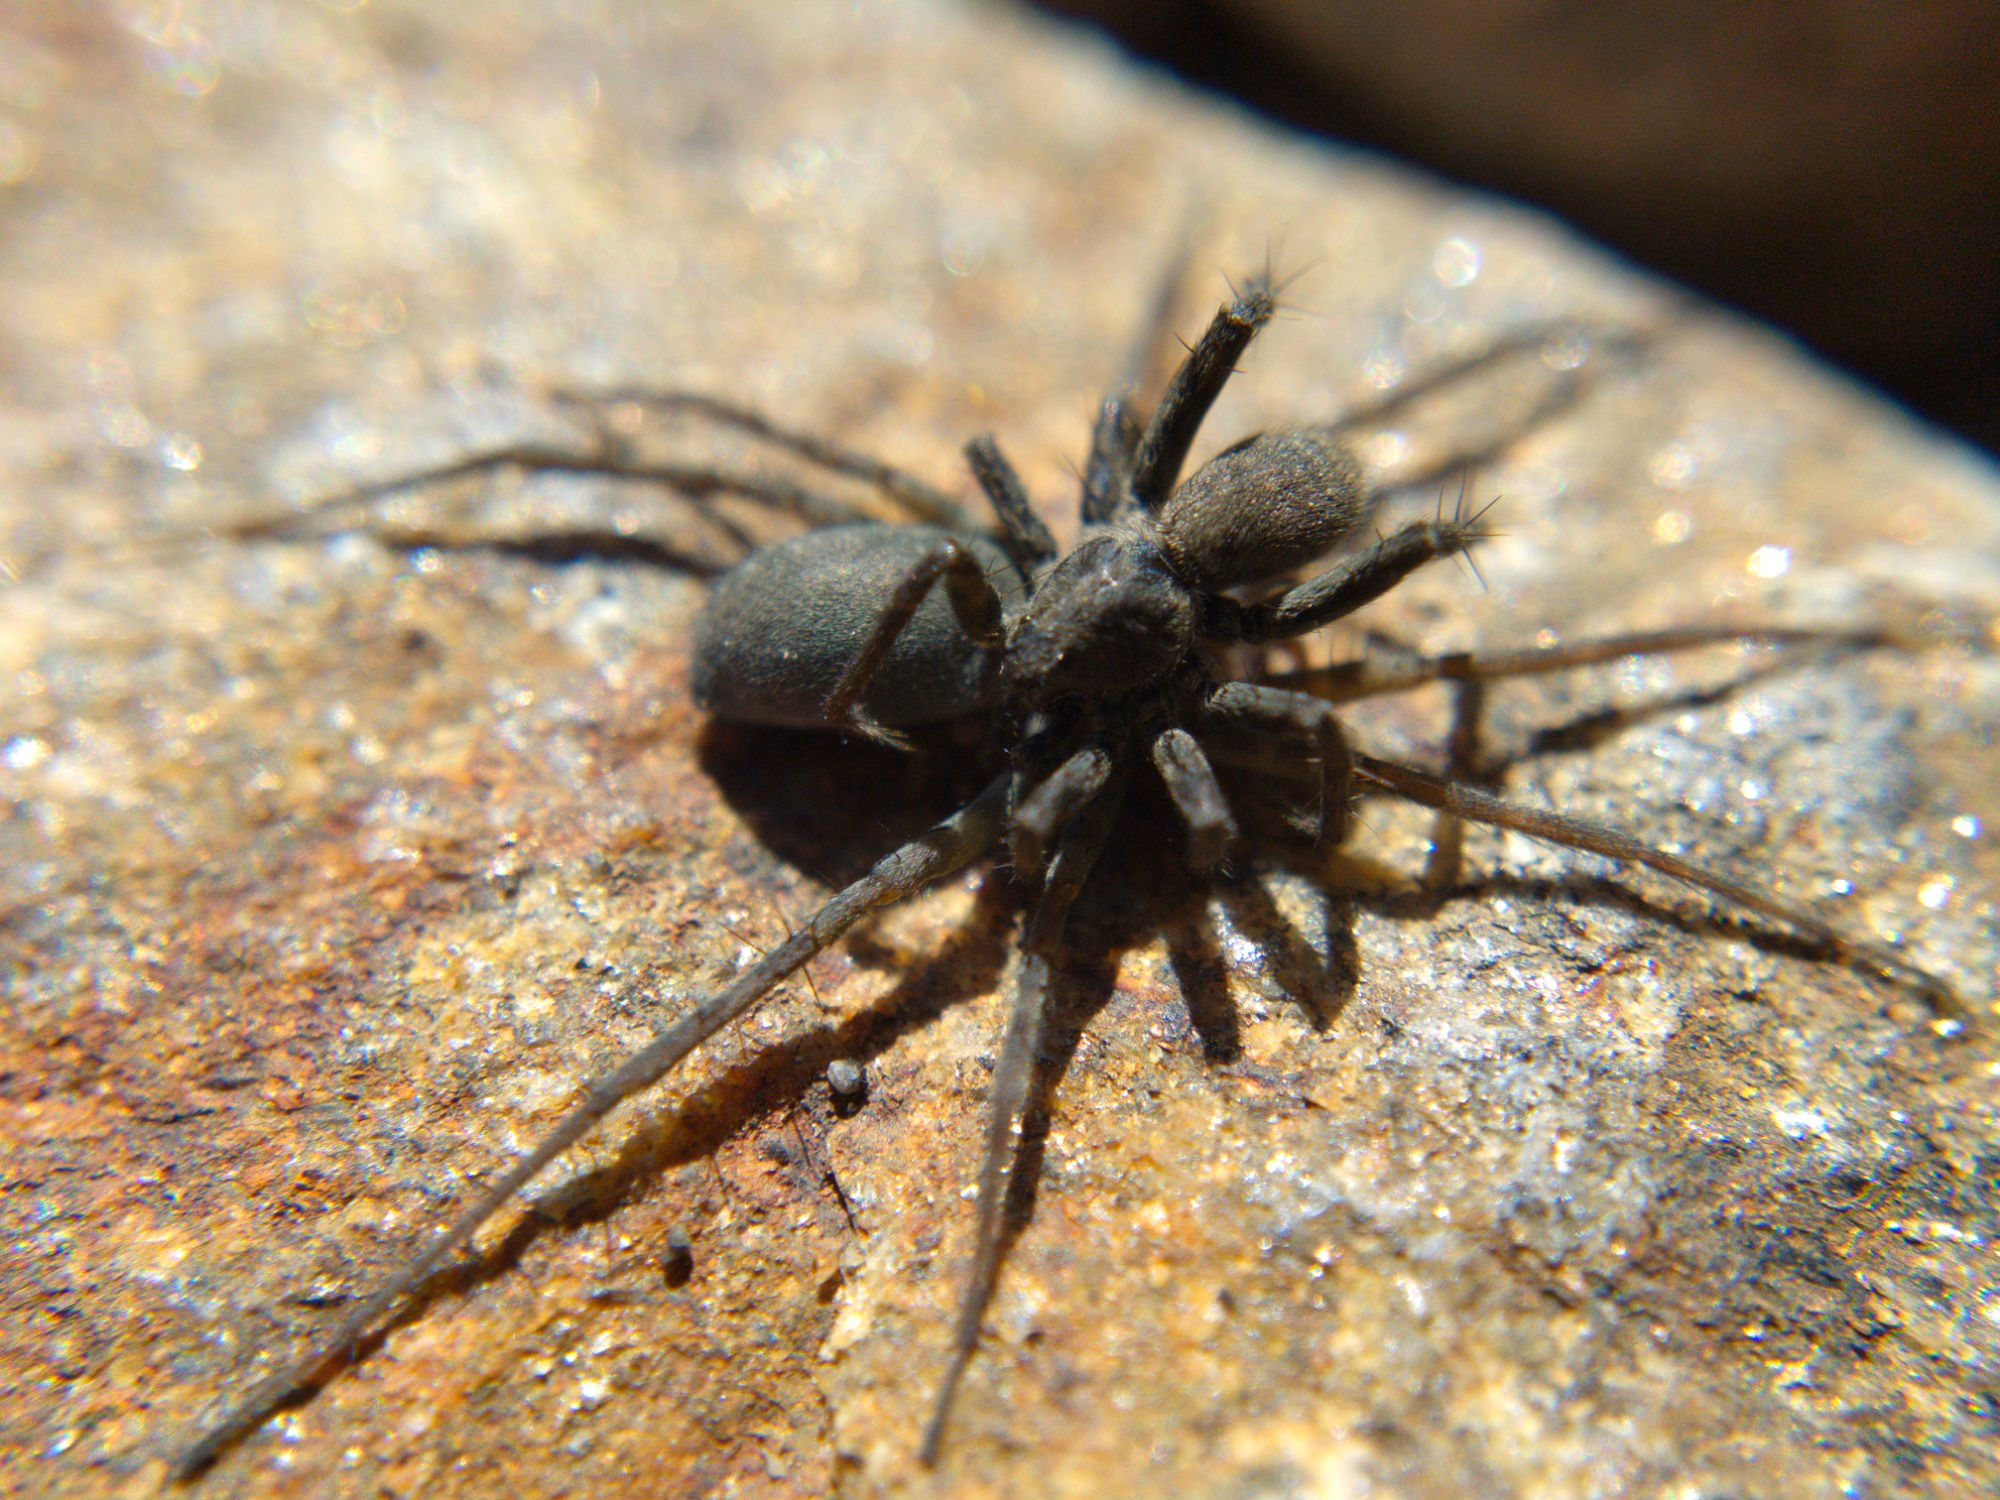 Mating long-legged wolf spiders. The male is reaching underneath the female with his pedipalps.